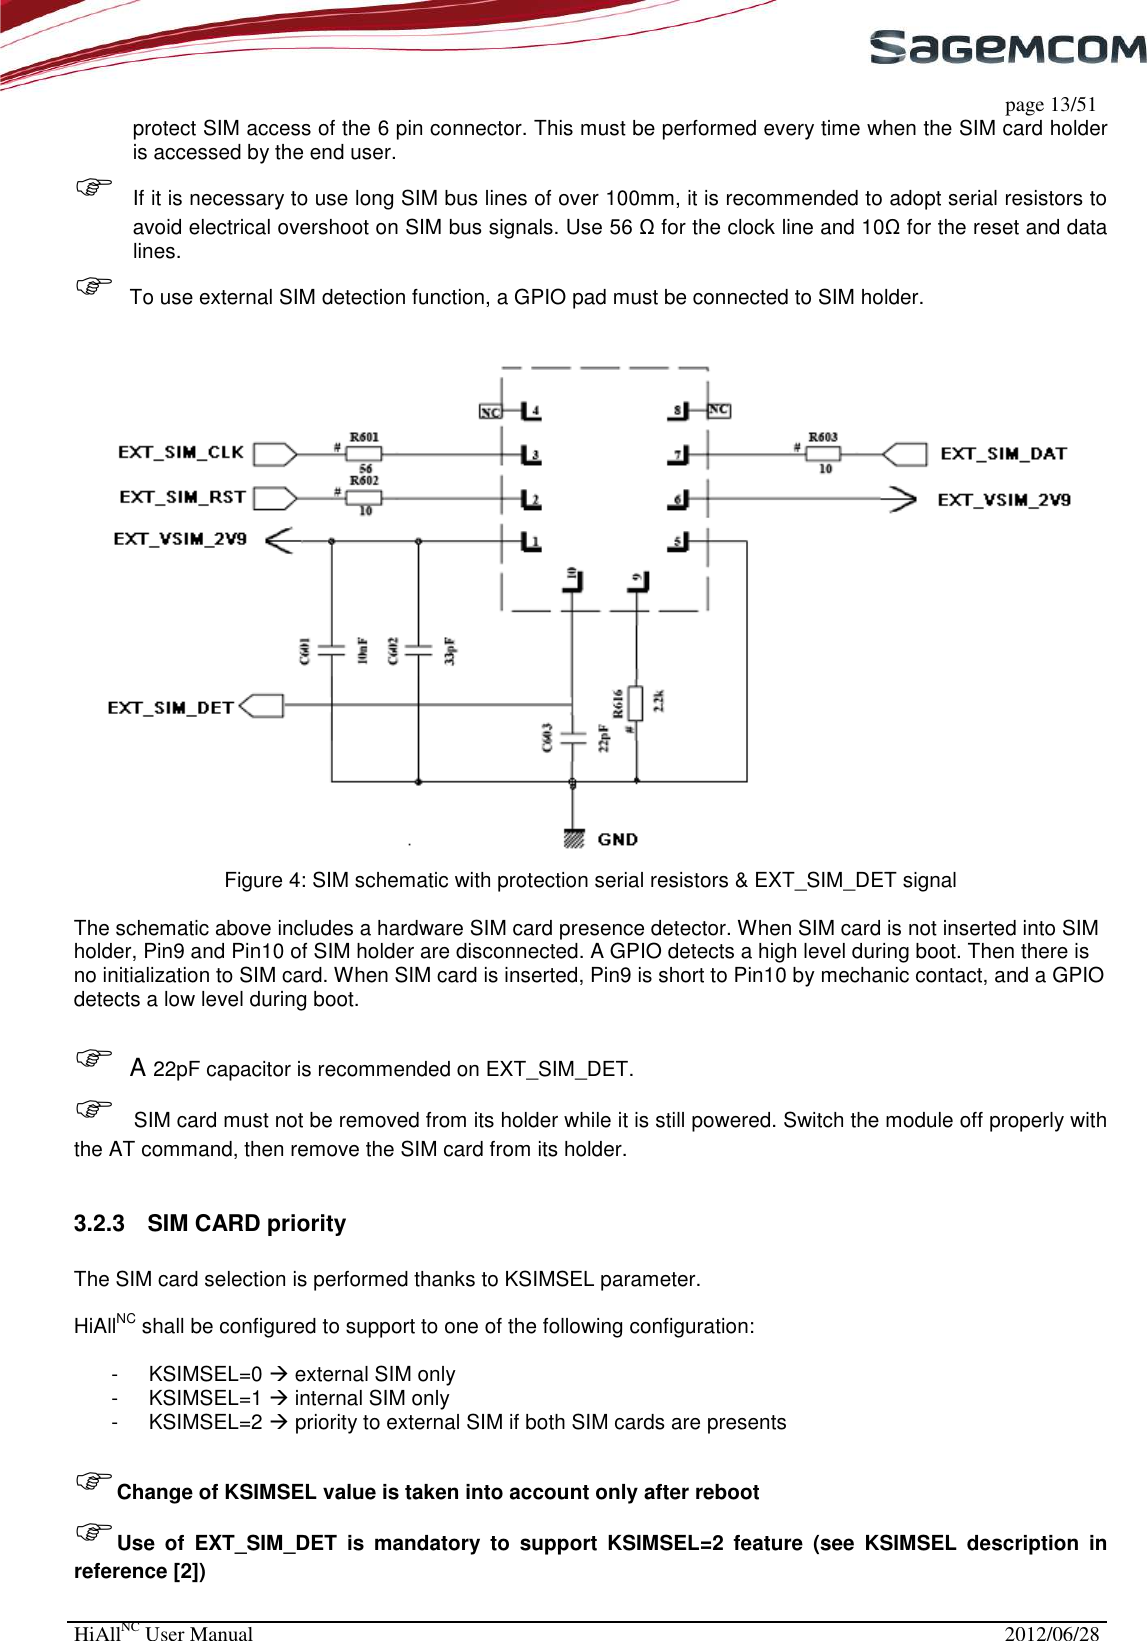     page 13/51 HiAllNC User Manual  2012/06/28  protect SIM access of the 6 pin connector. This must be performed every time when the SIM card holder is accessed by the end user.  If it is necessary to use long SIM bus lines of over 100mm, it is recommended to adopt serial resistors to avoid electrical overshoot on SIM bus signals. Use 56 Ω for the clock line and 10Ω for the reset and data lines.  To use external SIM detection function, a GPIO pad must be connected to SIM holder.    Figure 4: SIM schematic with protection serial resistors &amp; EXT_SIM_DET signal  The schematic above includes a hardware SIM card presence detector. When SIM card is not inserted into SIM holder, Pin9 and Pin10 of SIM holder are disconnected. A GPIO detects a high level during boot. Then there is no initialization to SIM card. When SIM card is inserted, Pin9 is short to Pin10 by mechanic contact, and a GPIO detects a low level during boot.    A 22pF capacitor is recommended on EXT_SIM_DET.  SIM card must not be removed from its holder while it is still powered. Switch the module off properly with the AT command, then remove the SIM card from its holder.  3.2.3  SIM CARD priority  The SIM card selection is performed thanks to KSIMSEL parameter.  HiAllNC shall be configured to support to one of the following configuration:  -  KSIMSEL=0  external SIM only -  KSIMSEL=1  internal SIM only -  KSIMSEL=2  priority to external SIM if both SIM cards are presents  Change of KSIMSEL value is taken into account only after reboot Use  of  EXT_SIM_DET  is  mandatory  to  support  KSIMSEL=2  feature  (see  KSIMSEL  description  in reference [2])  